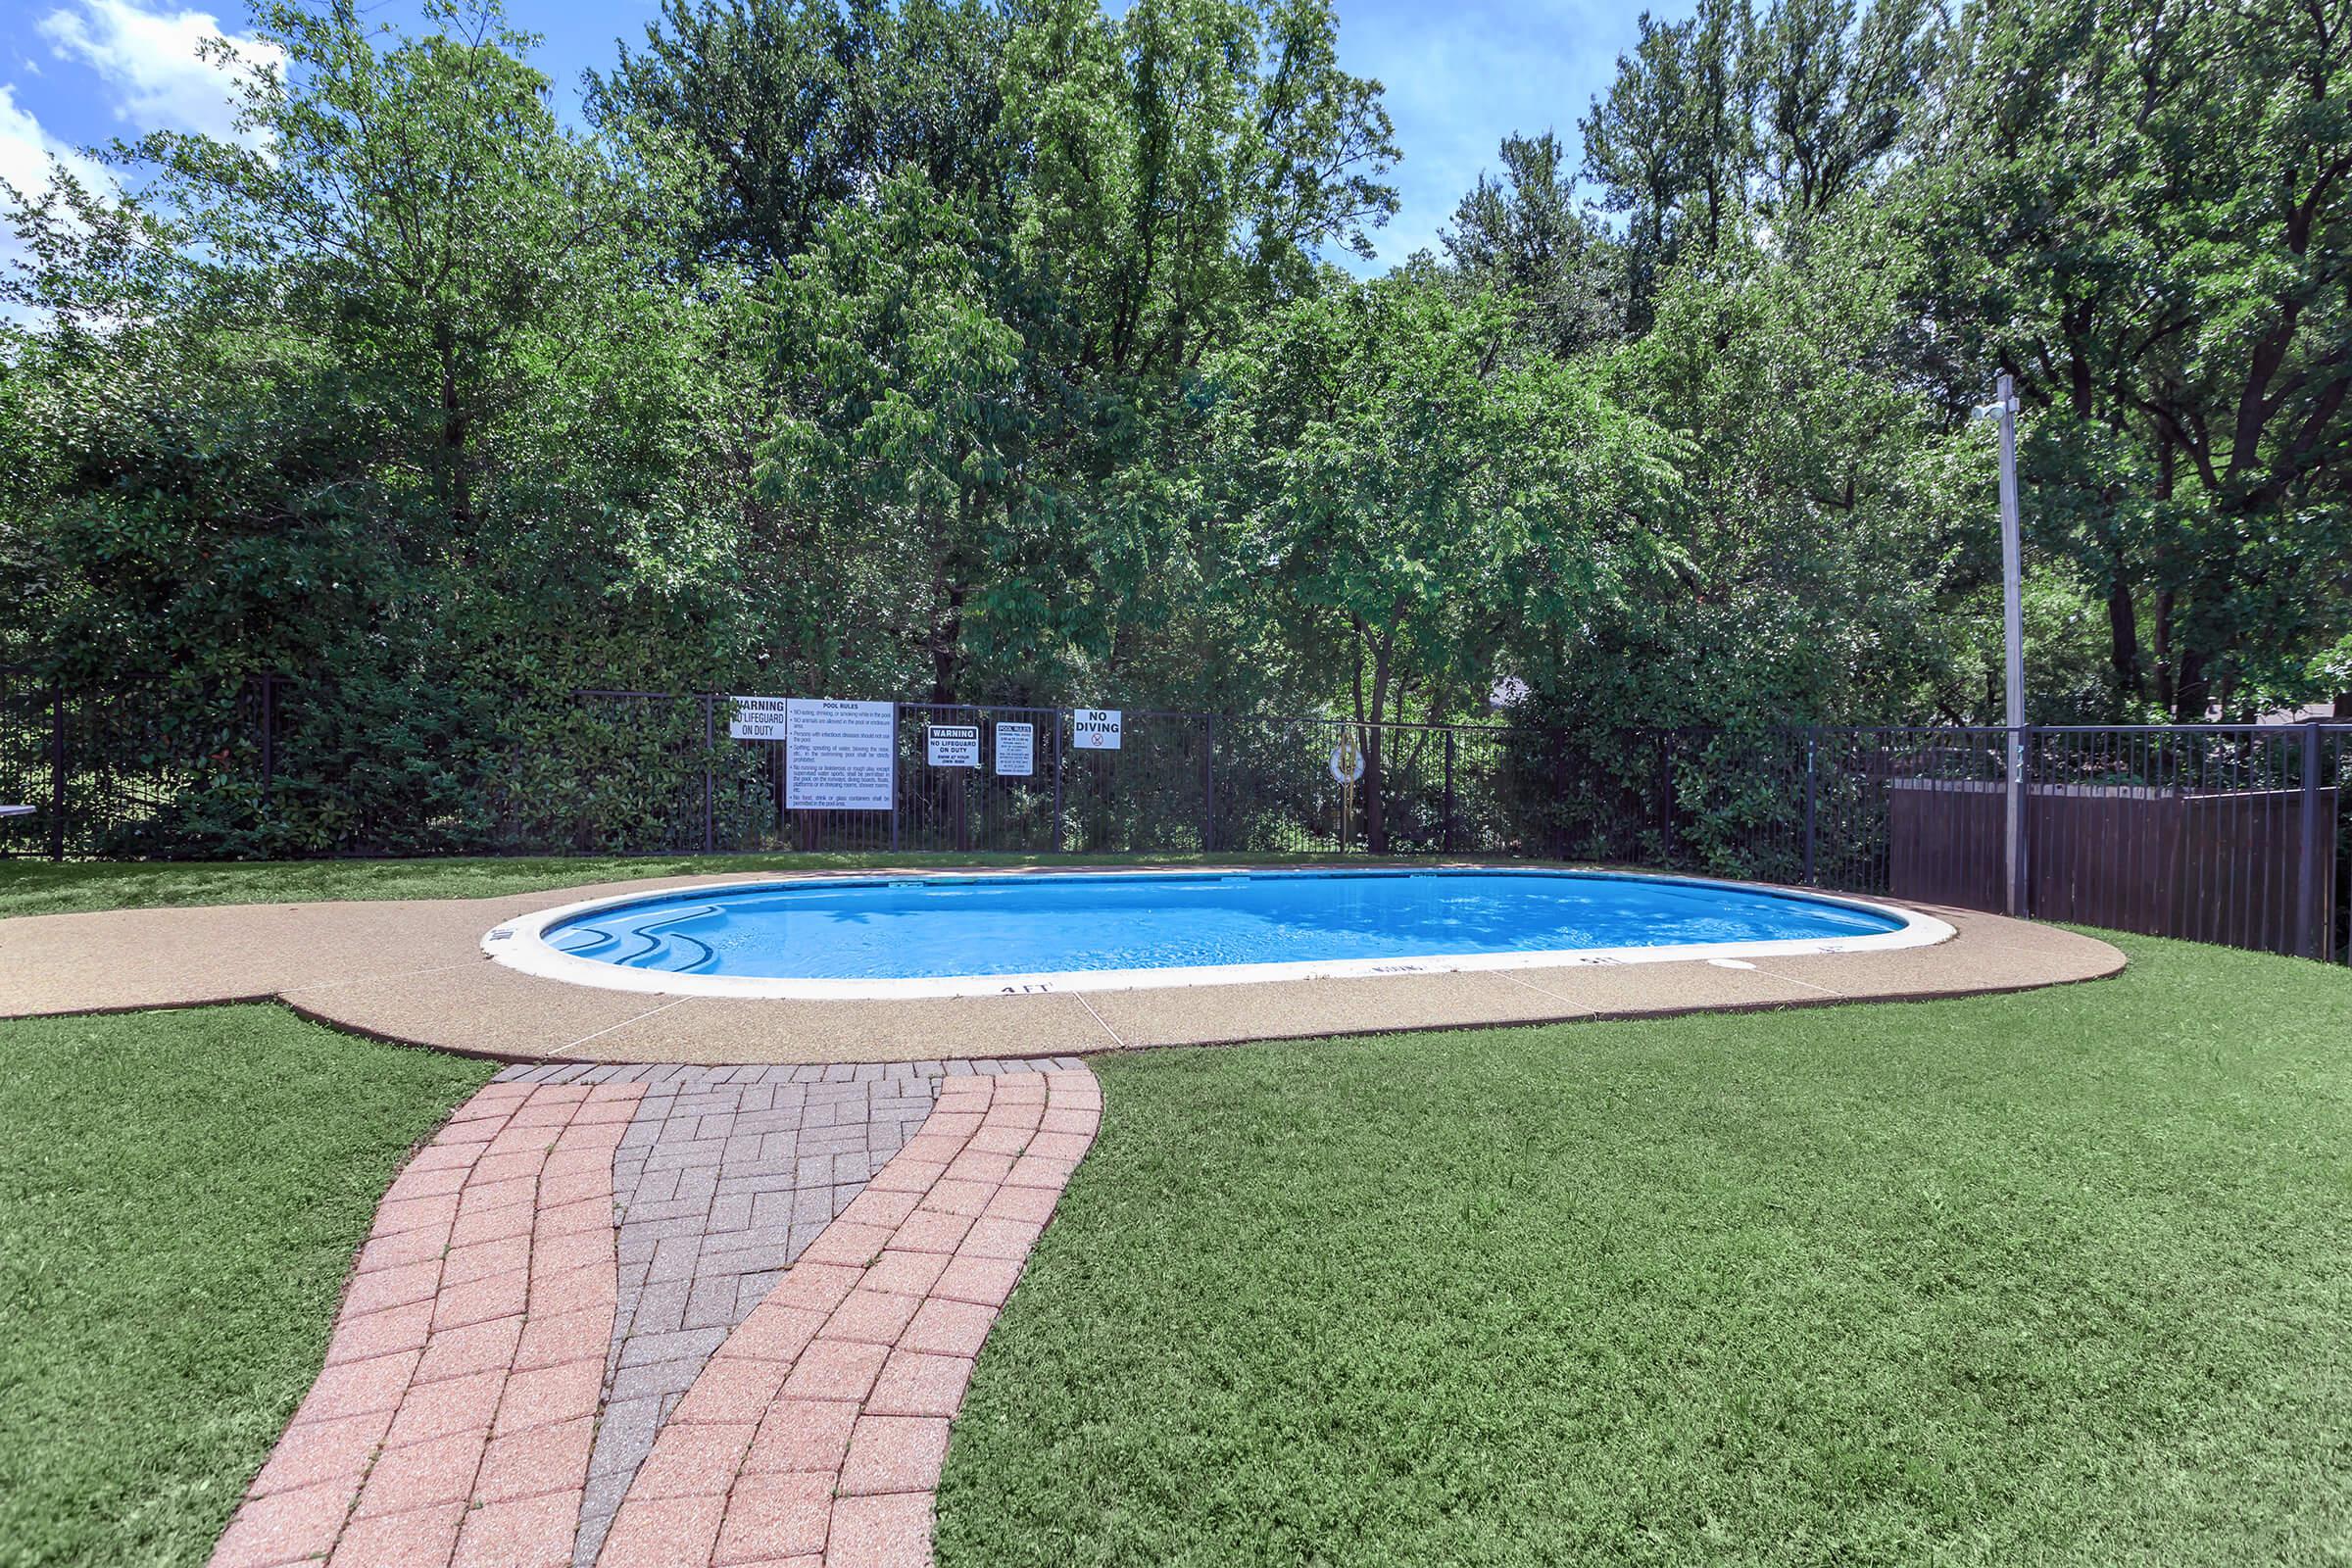 a pool with grass and trees